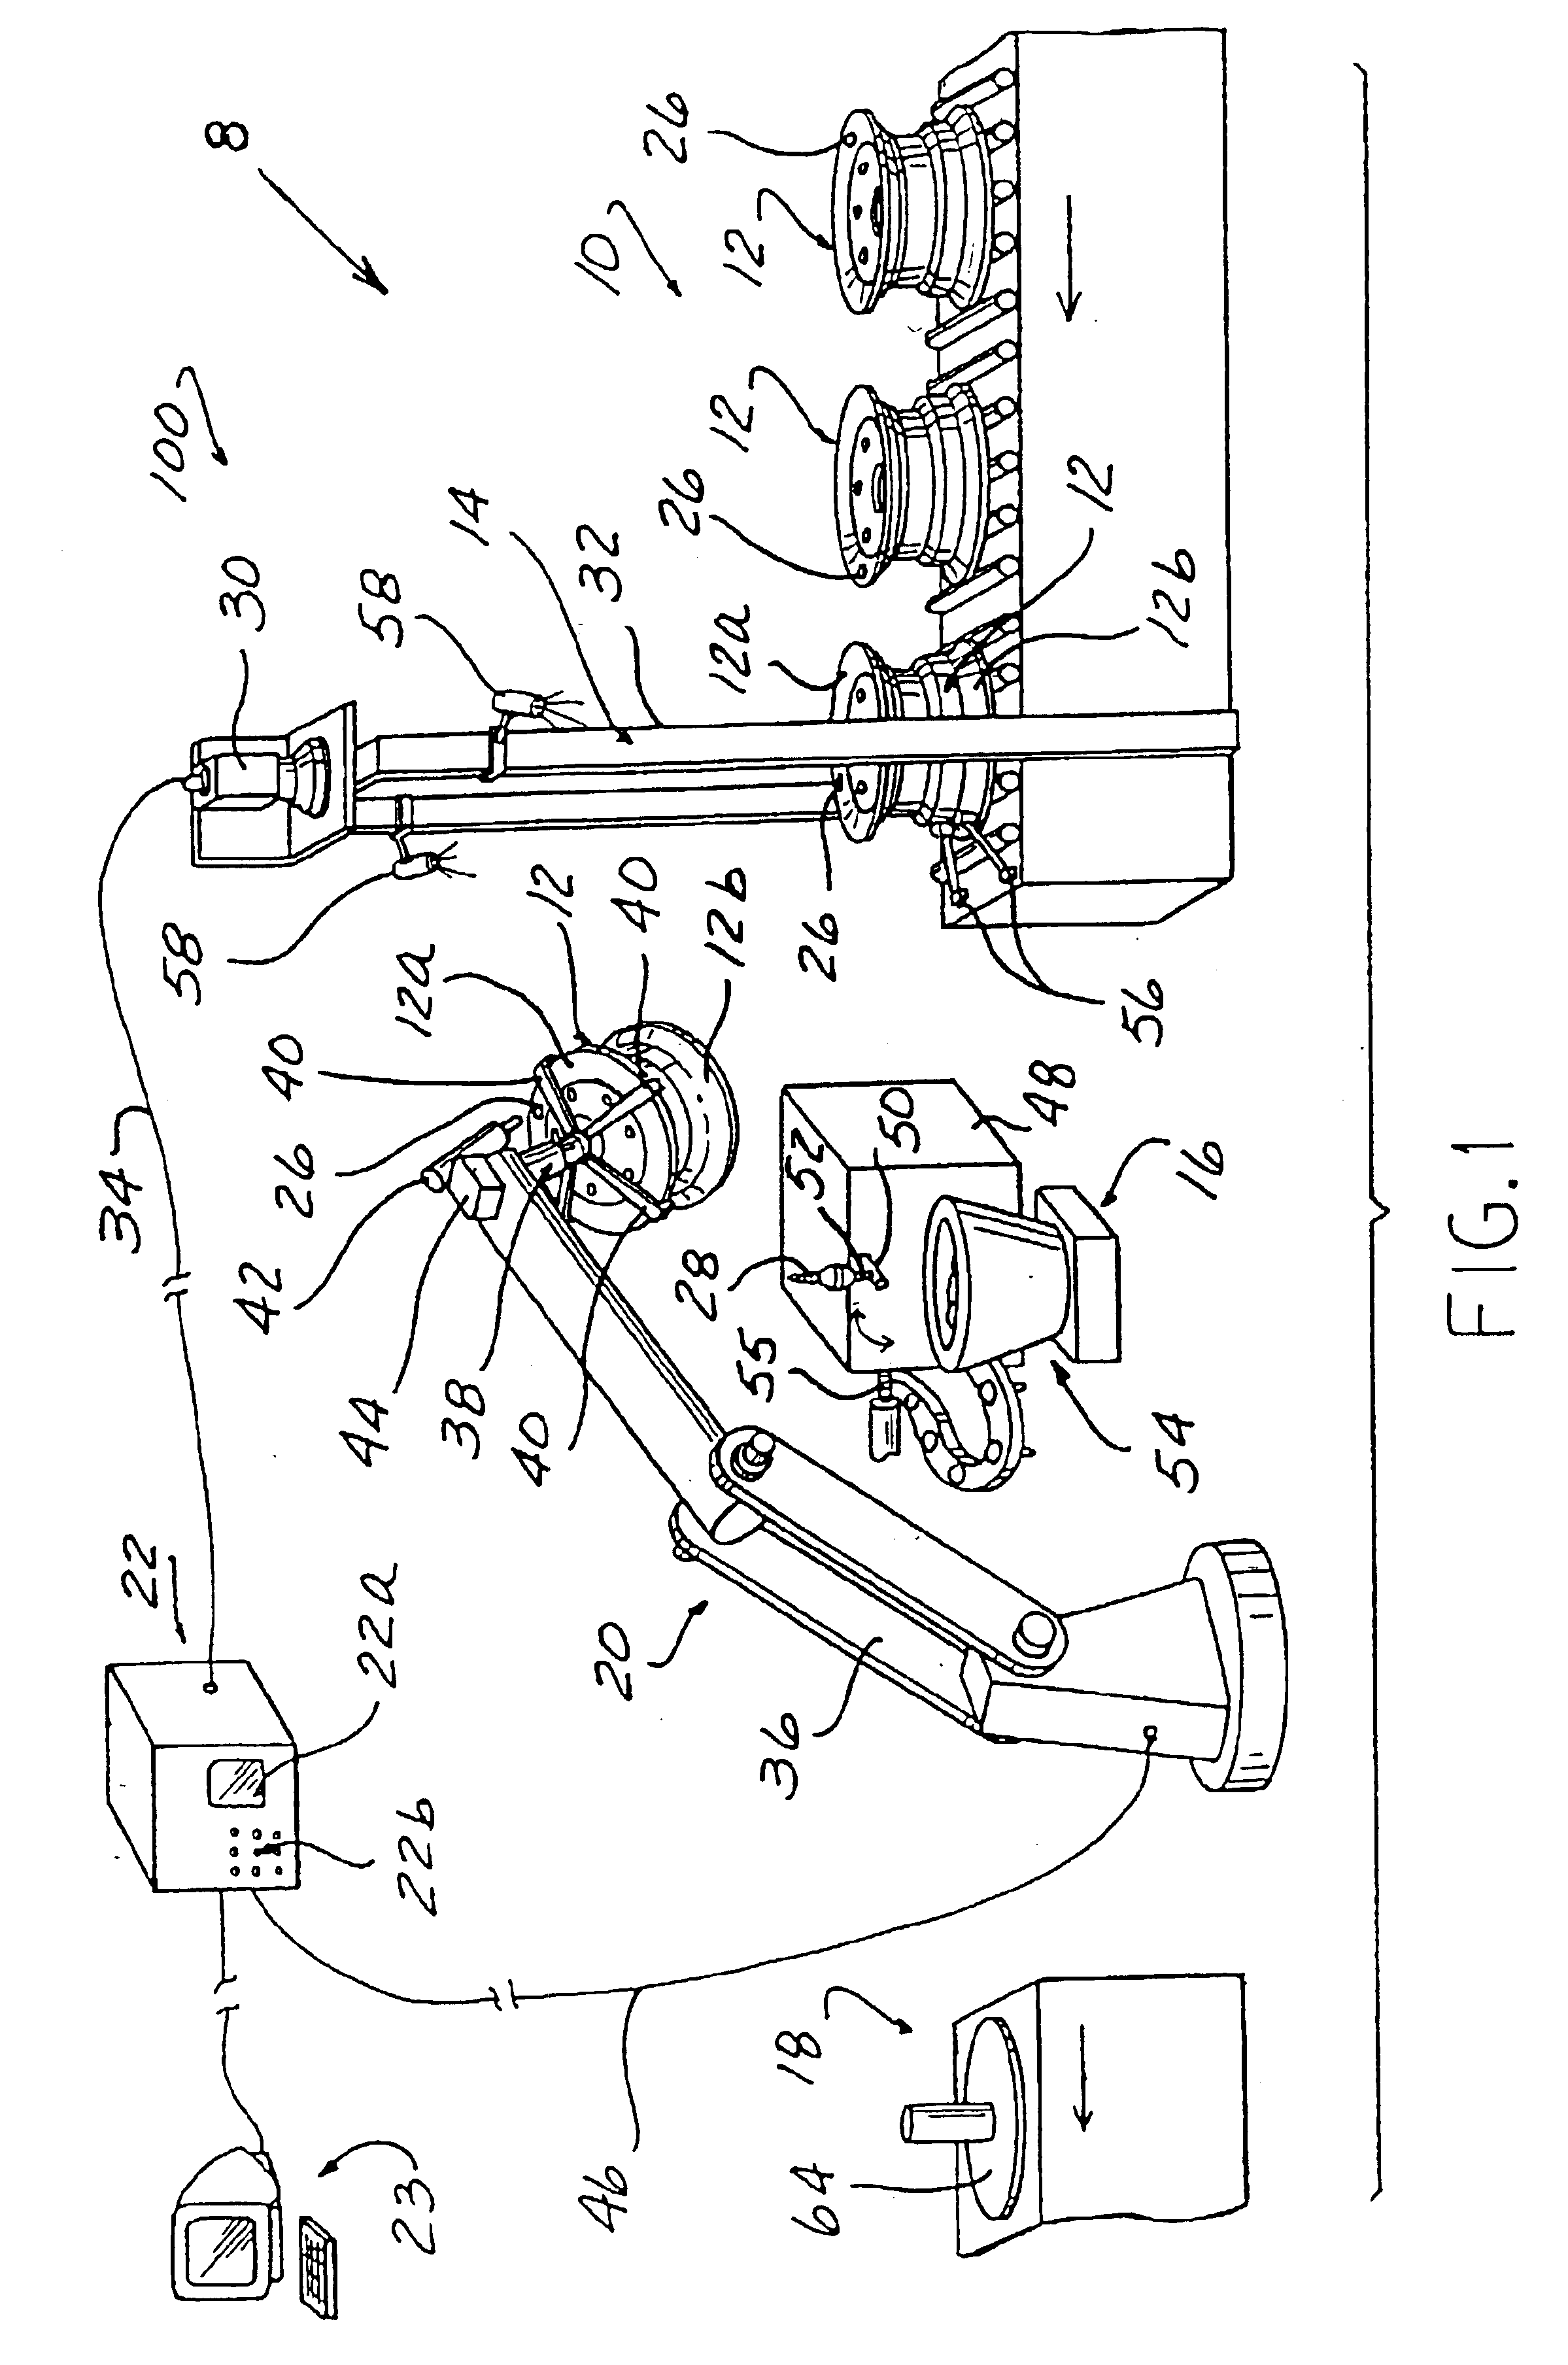 Robotic apparatus and method for mounting a valve stem on a wheel rim